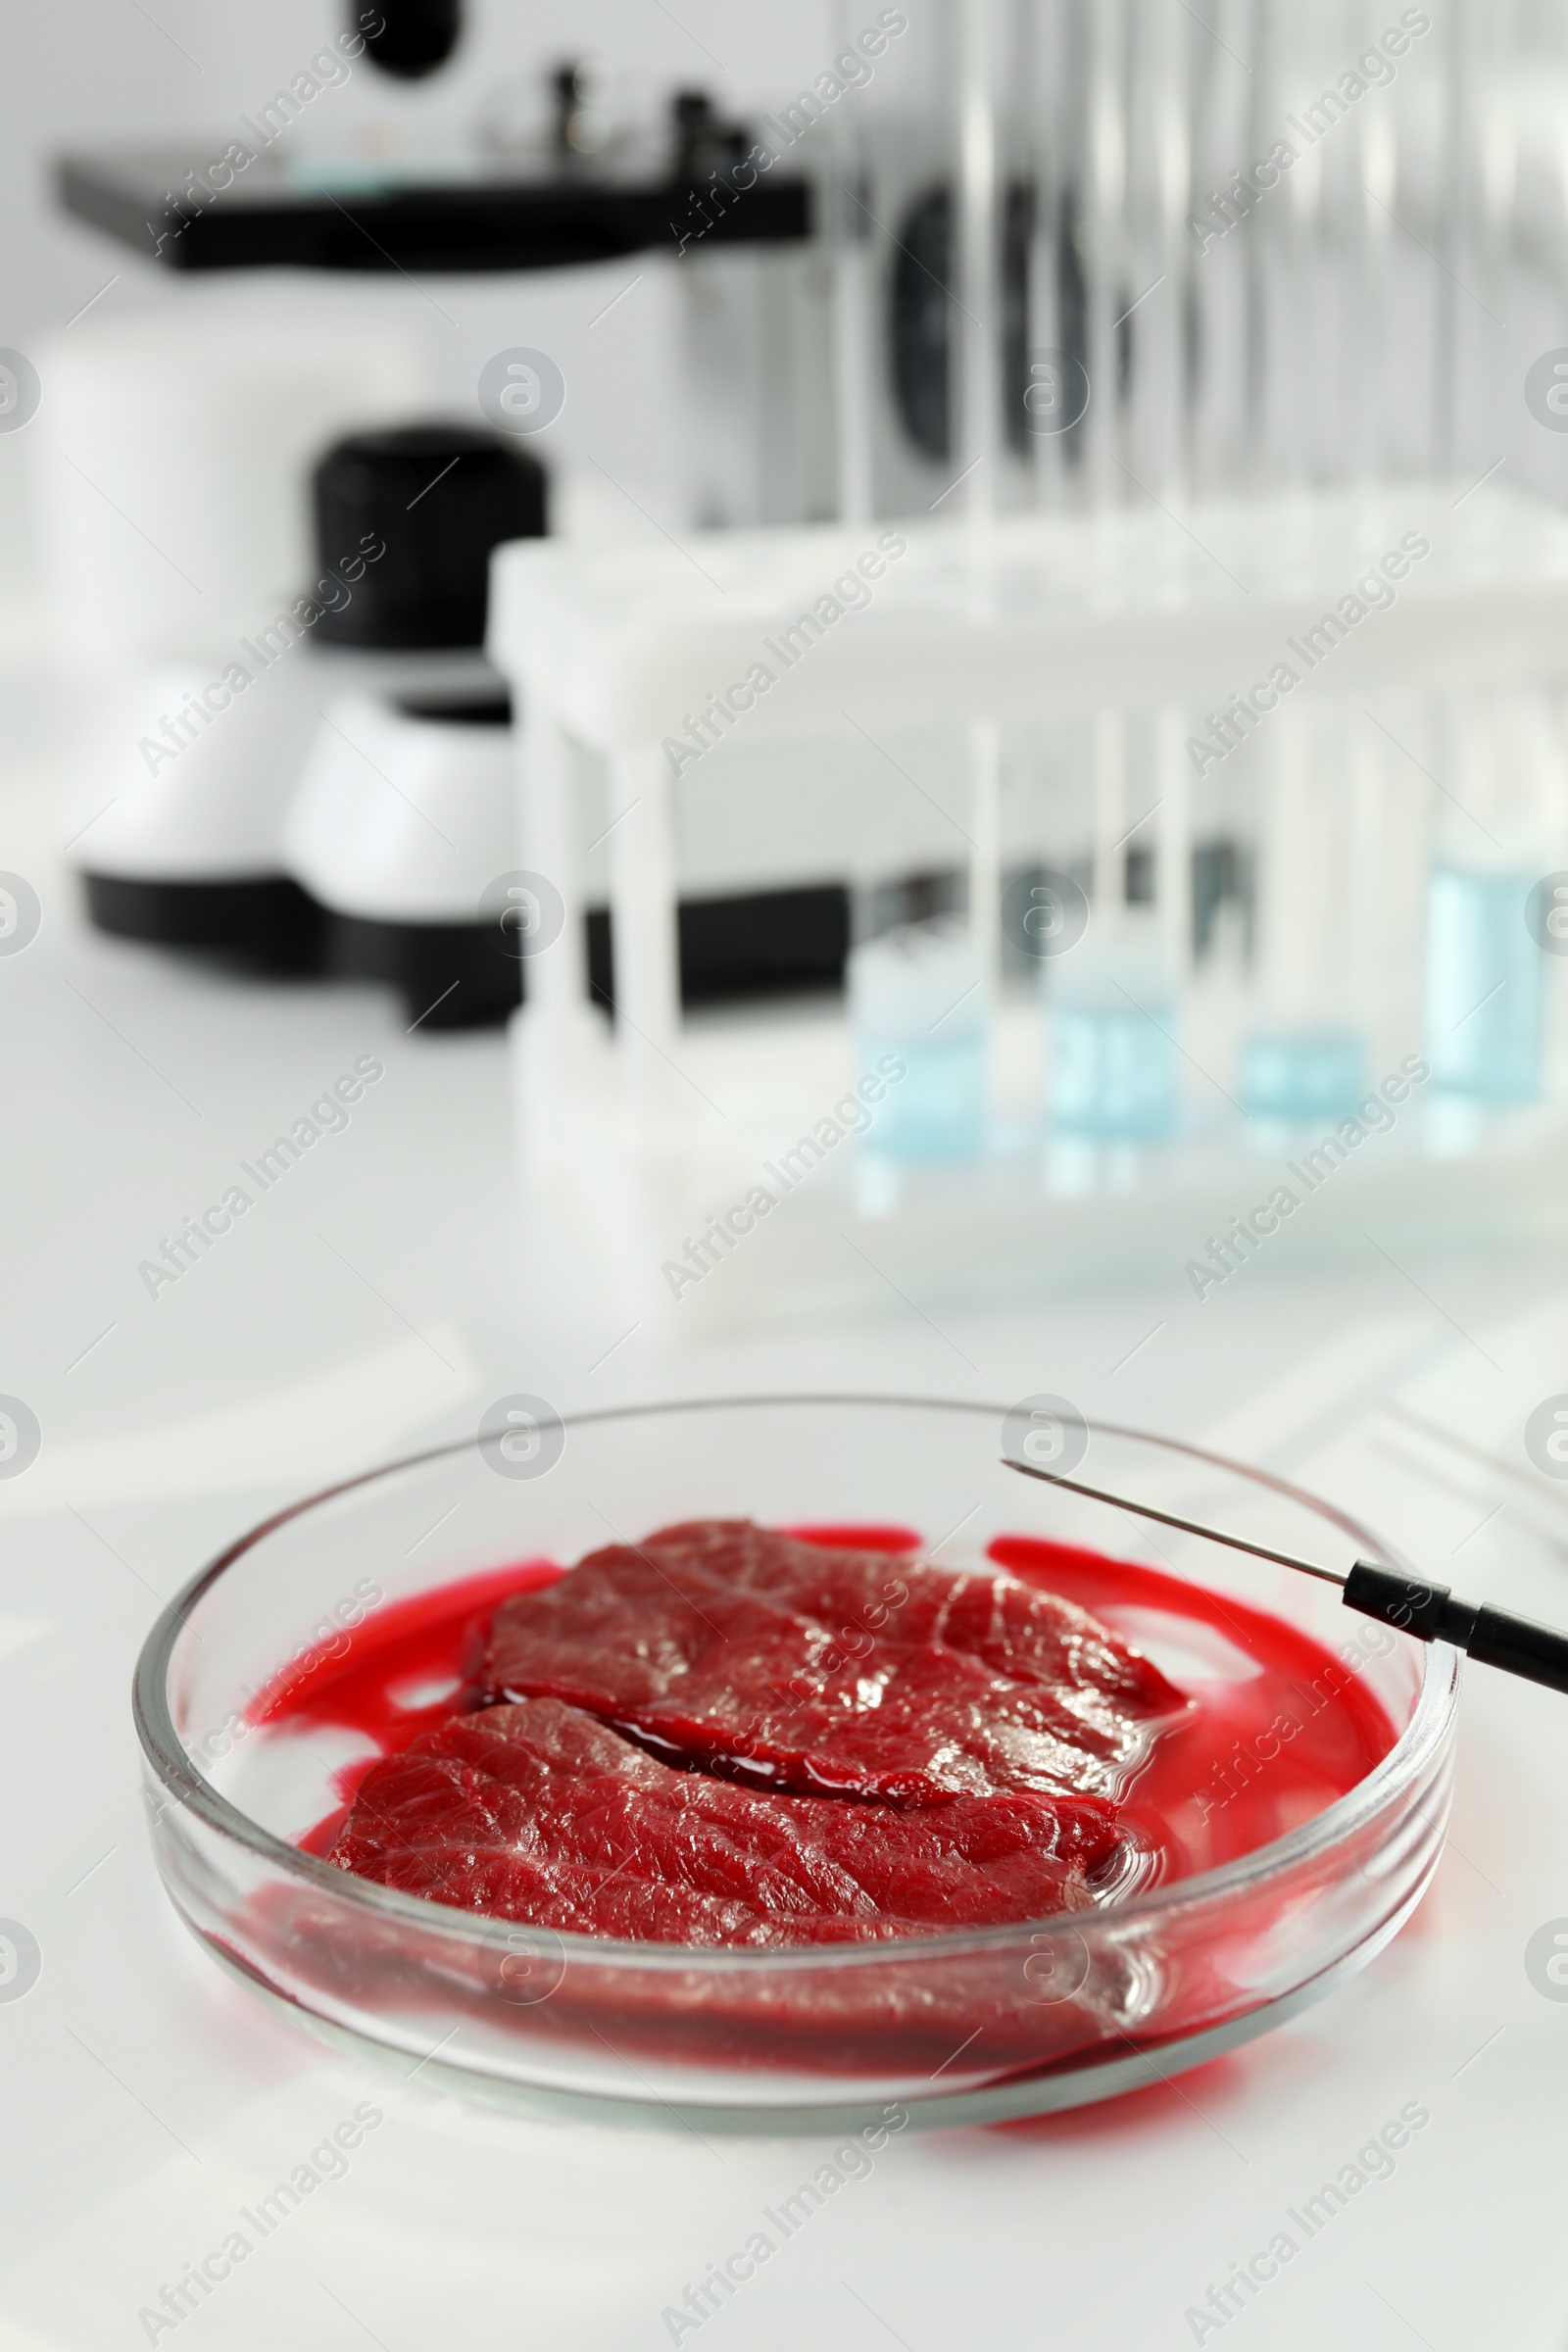 Photo of Petri dish with pieces of raw cultured meat on white table in laboratory, space for text